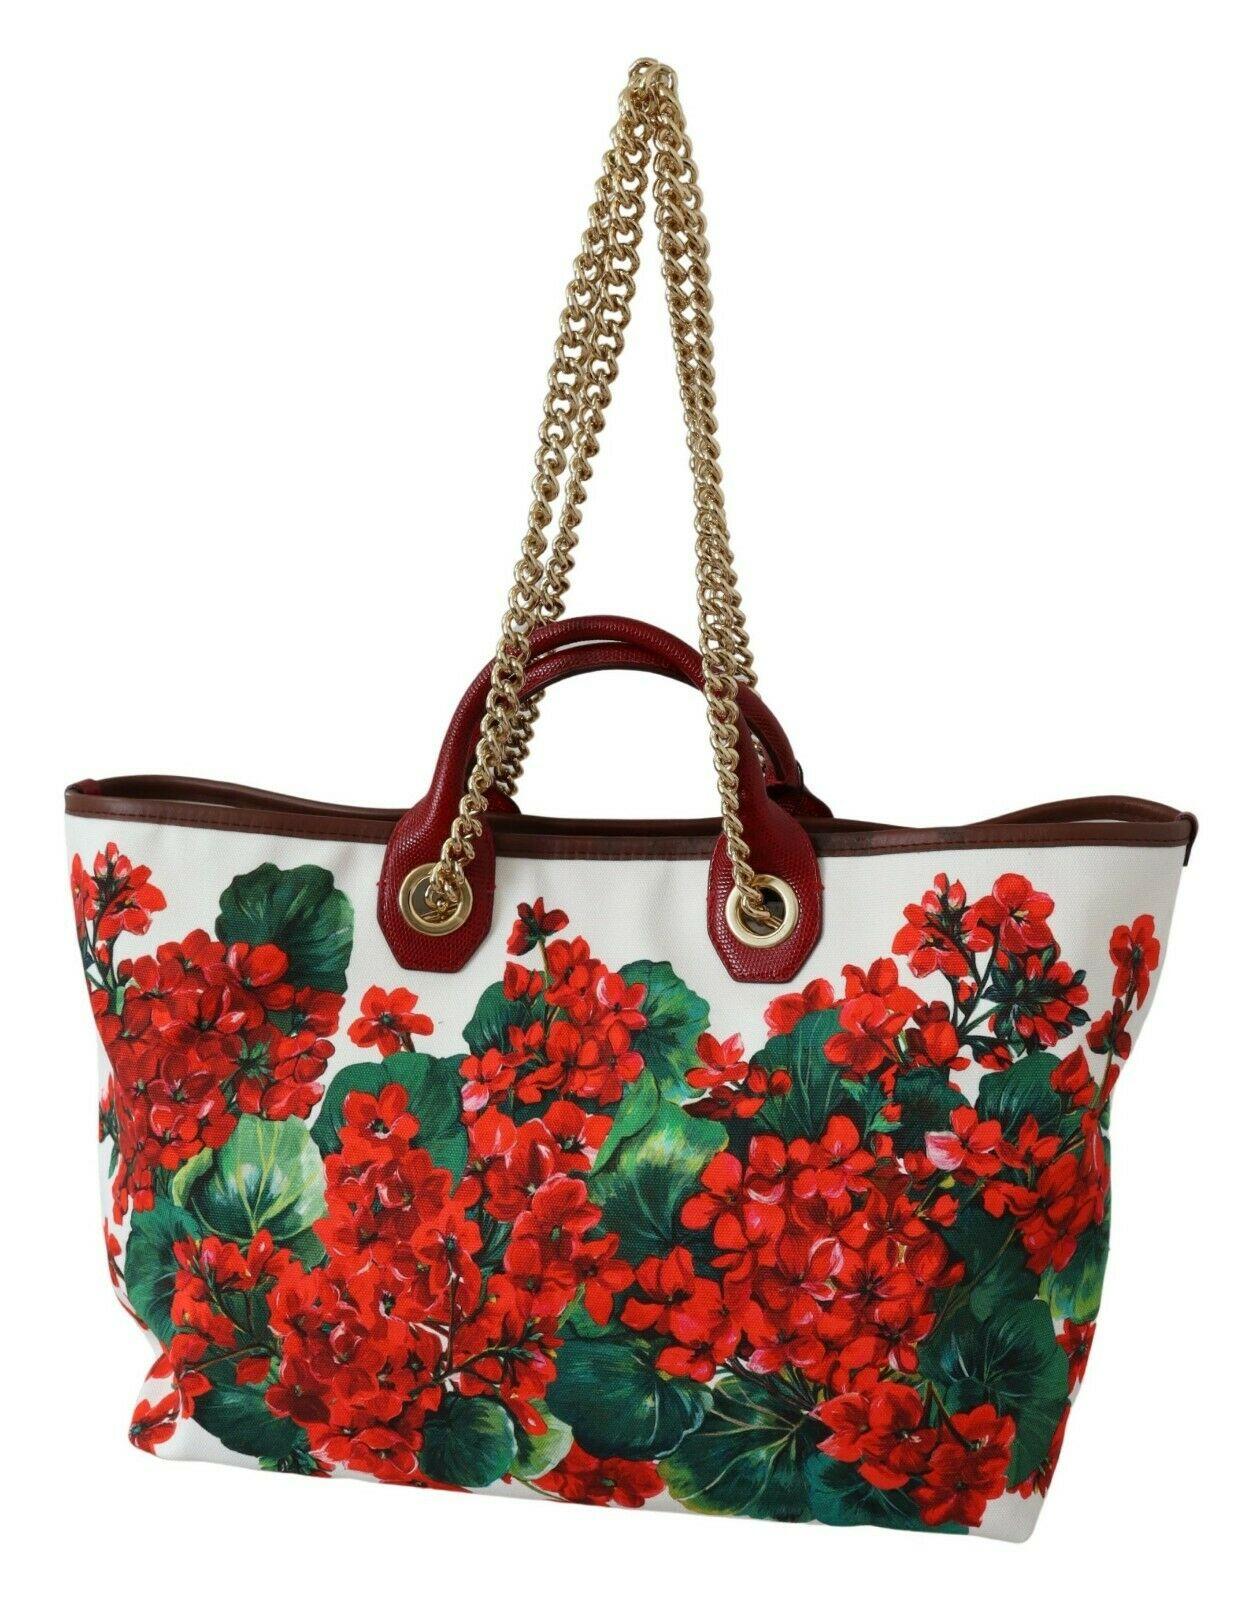 dolce and gabbana tote bag sale